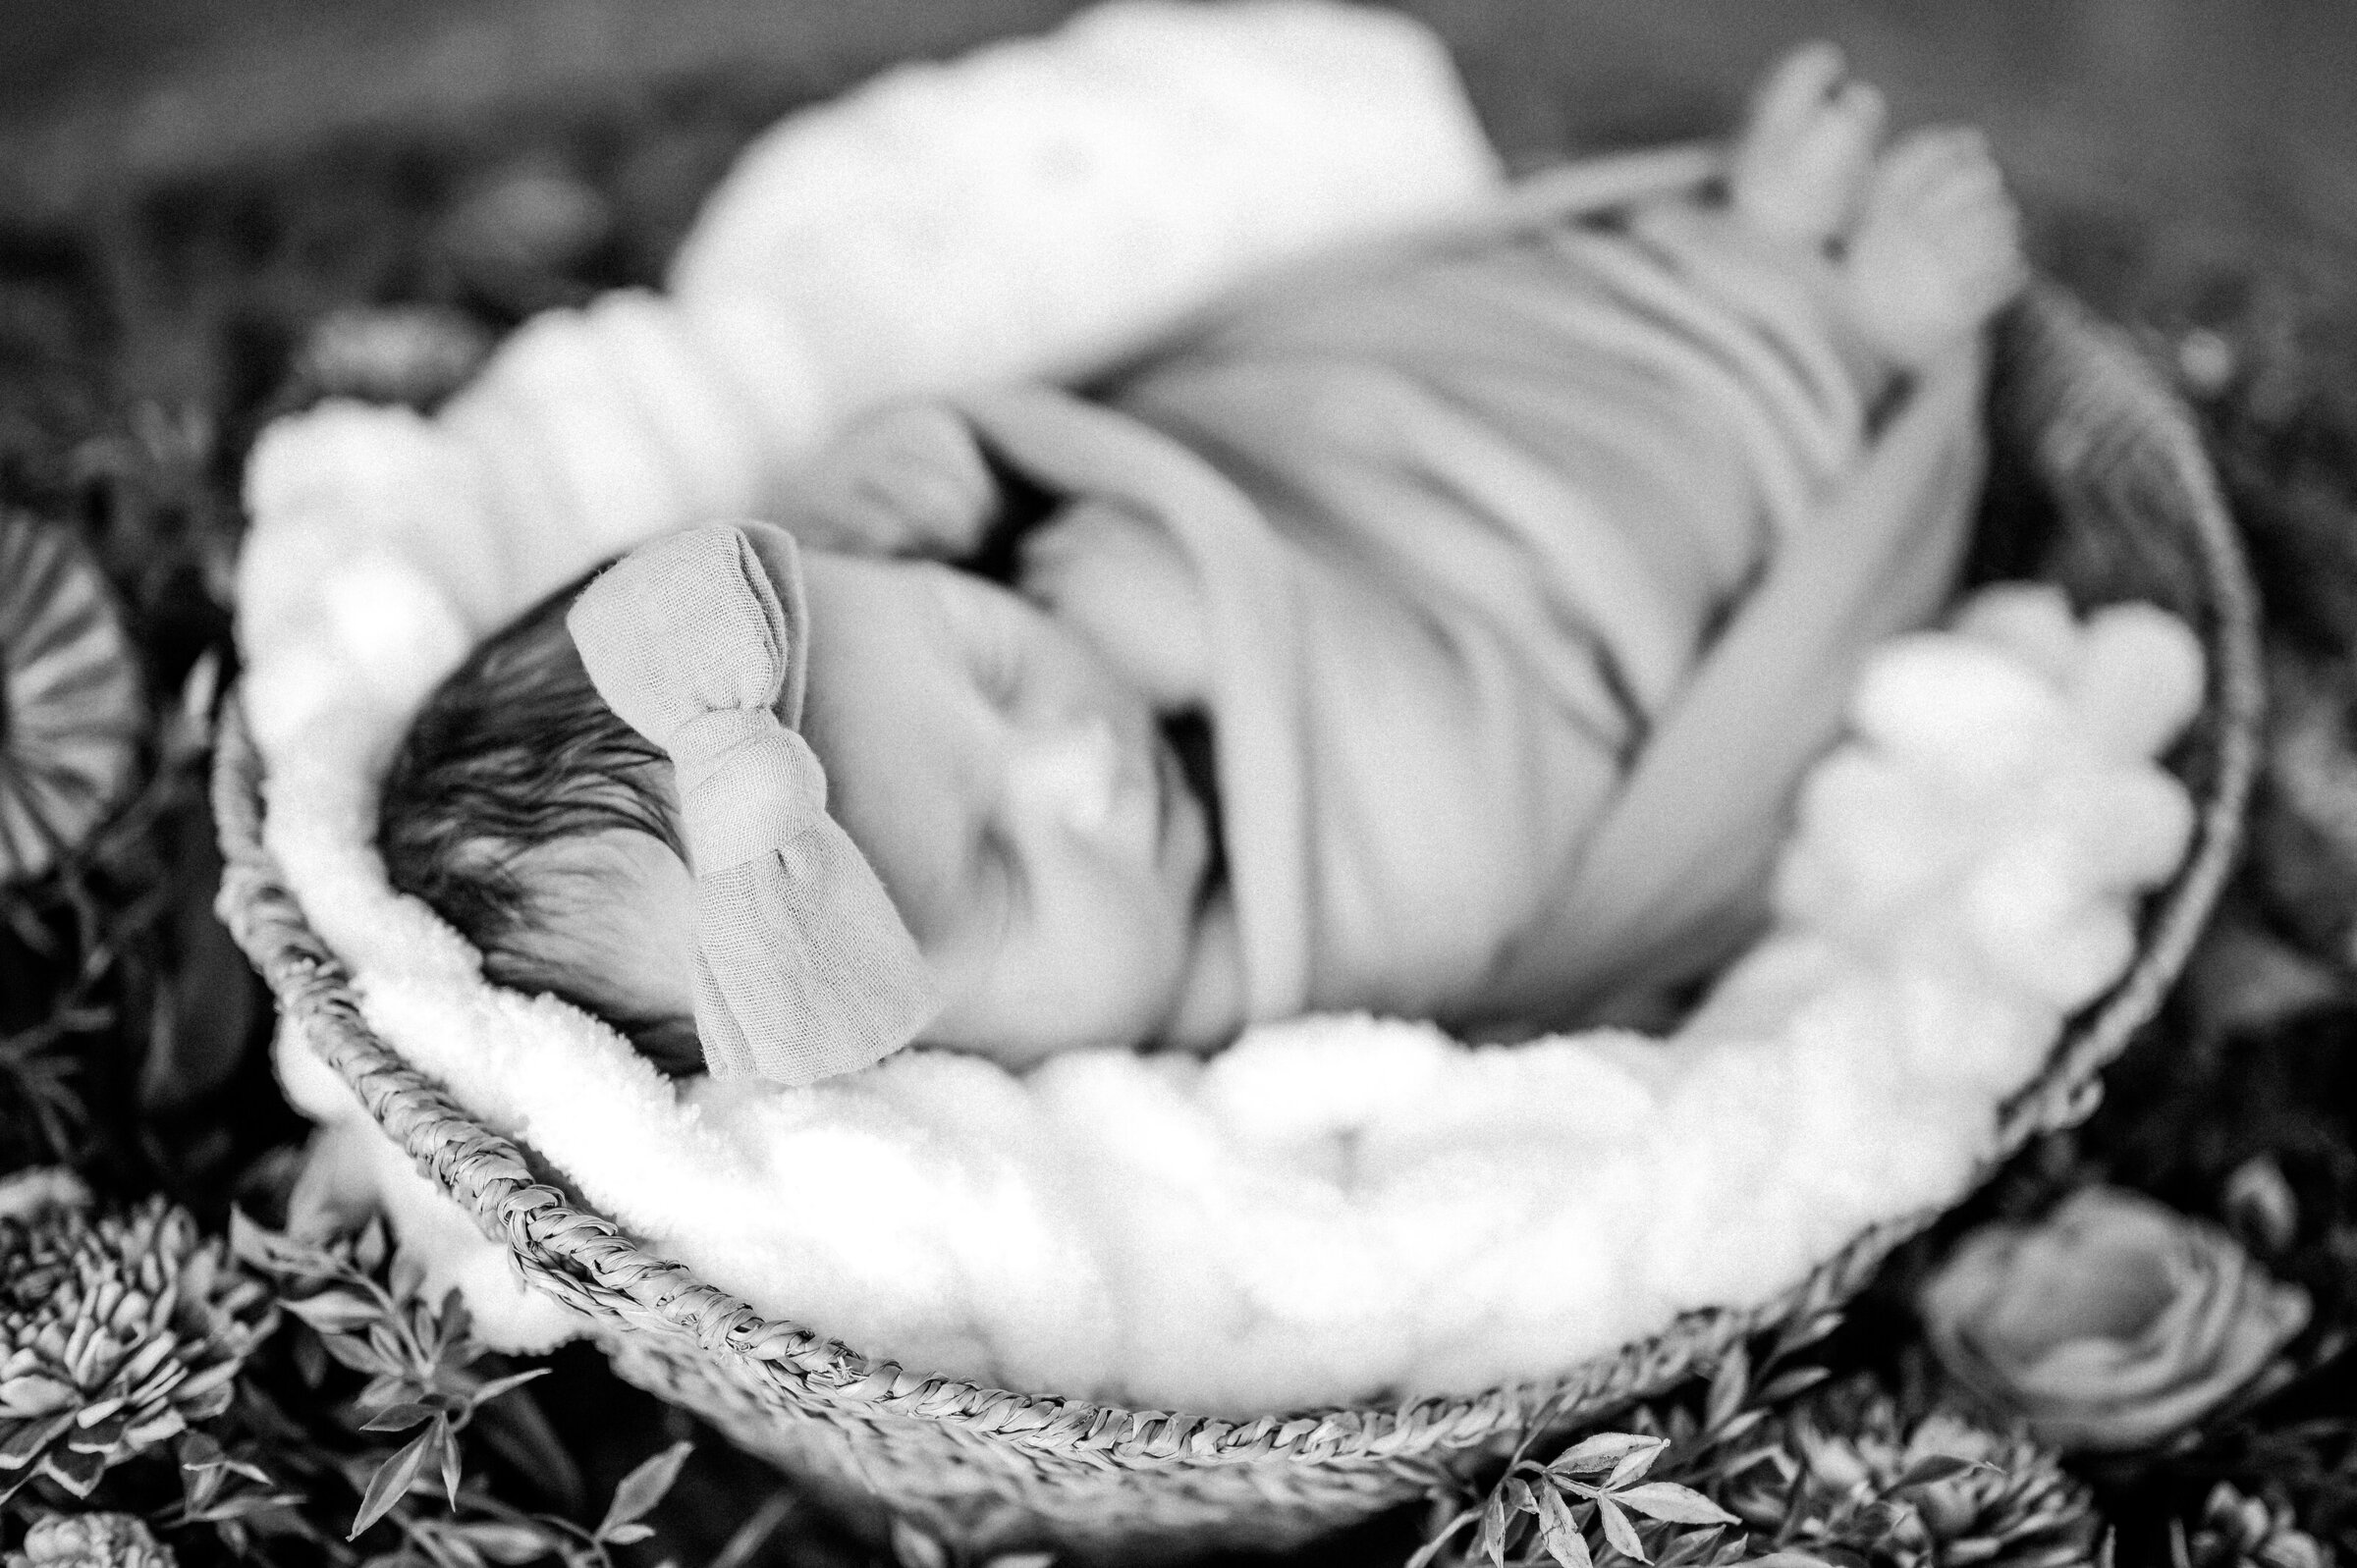 Black and white image of bow on baby's head while baby lays in basket surrounded by leaves